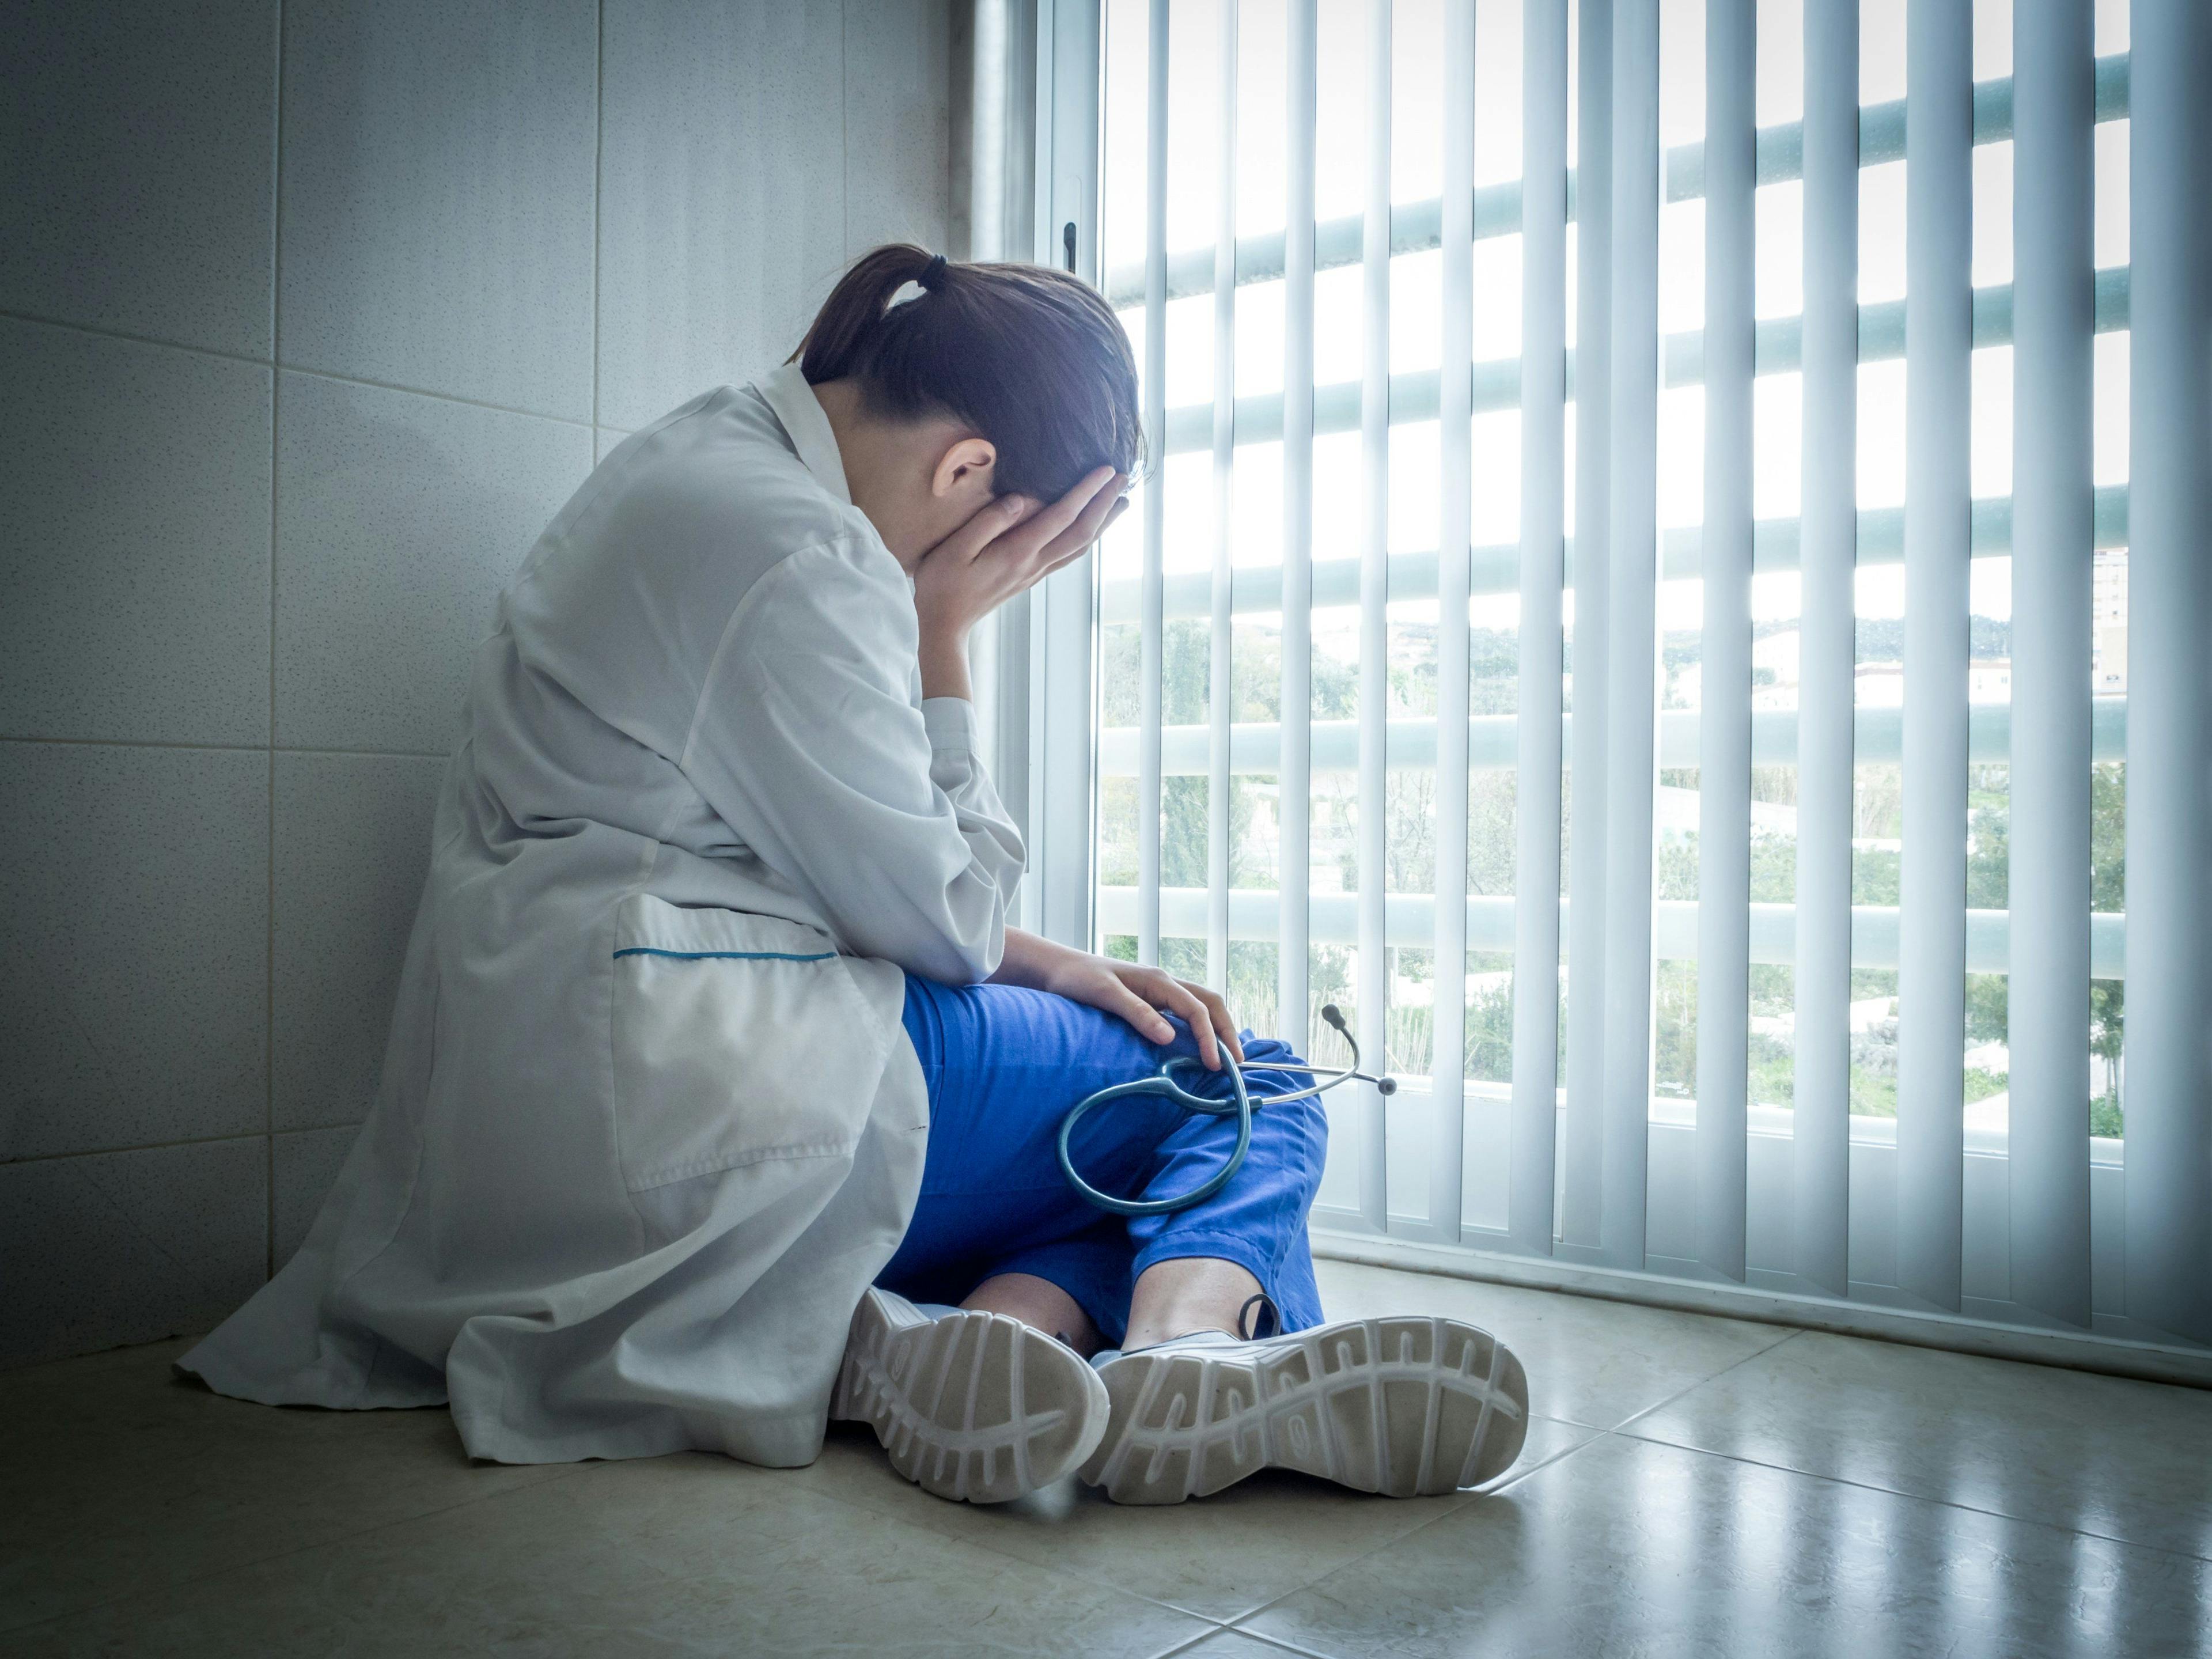 Depressed doctors more likely to report making medical errors